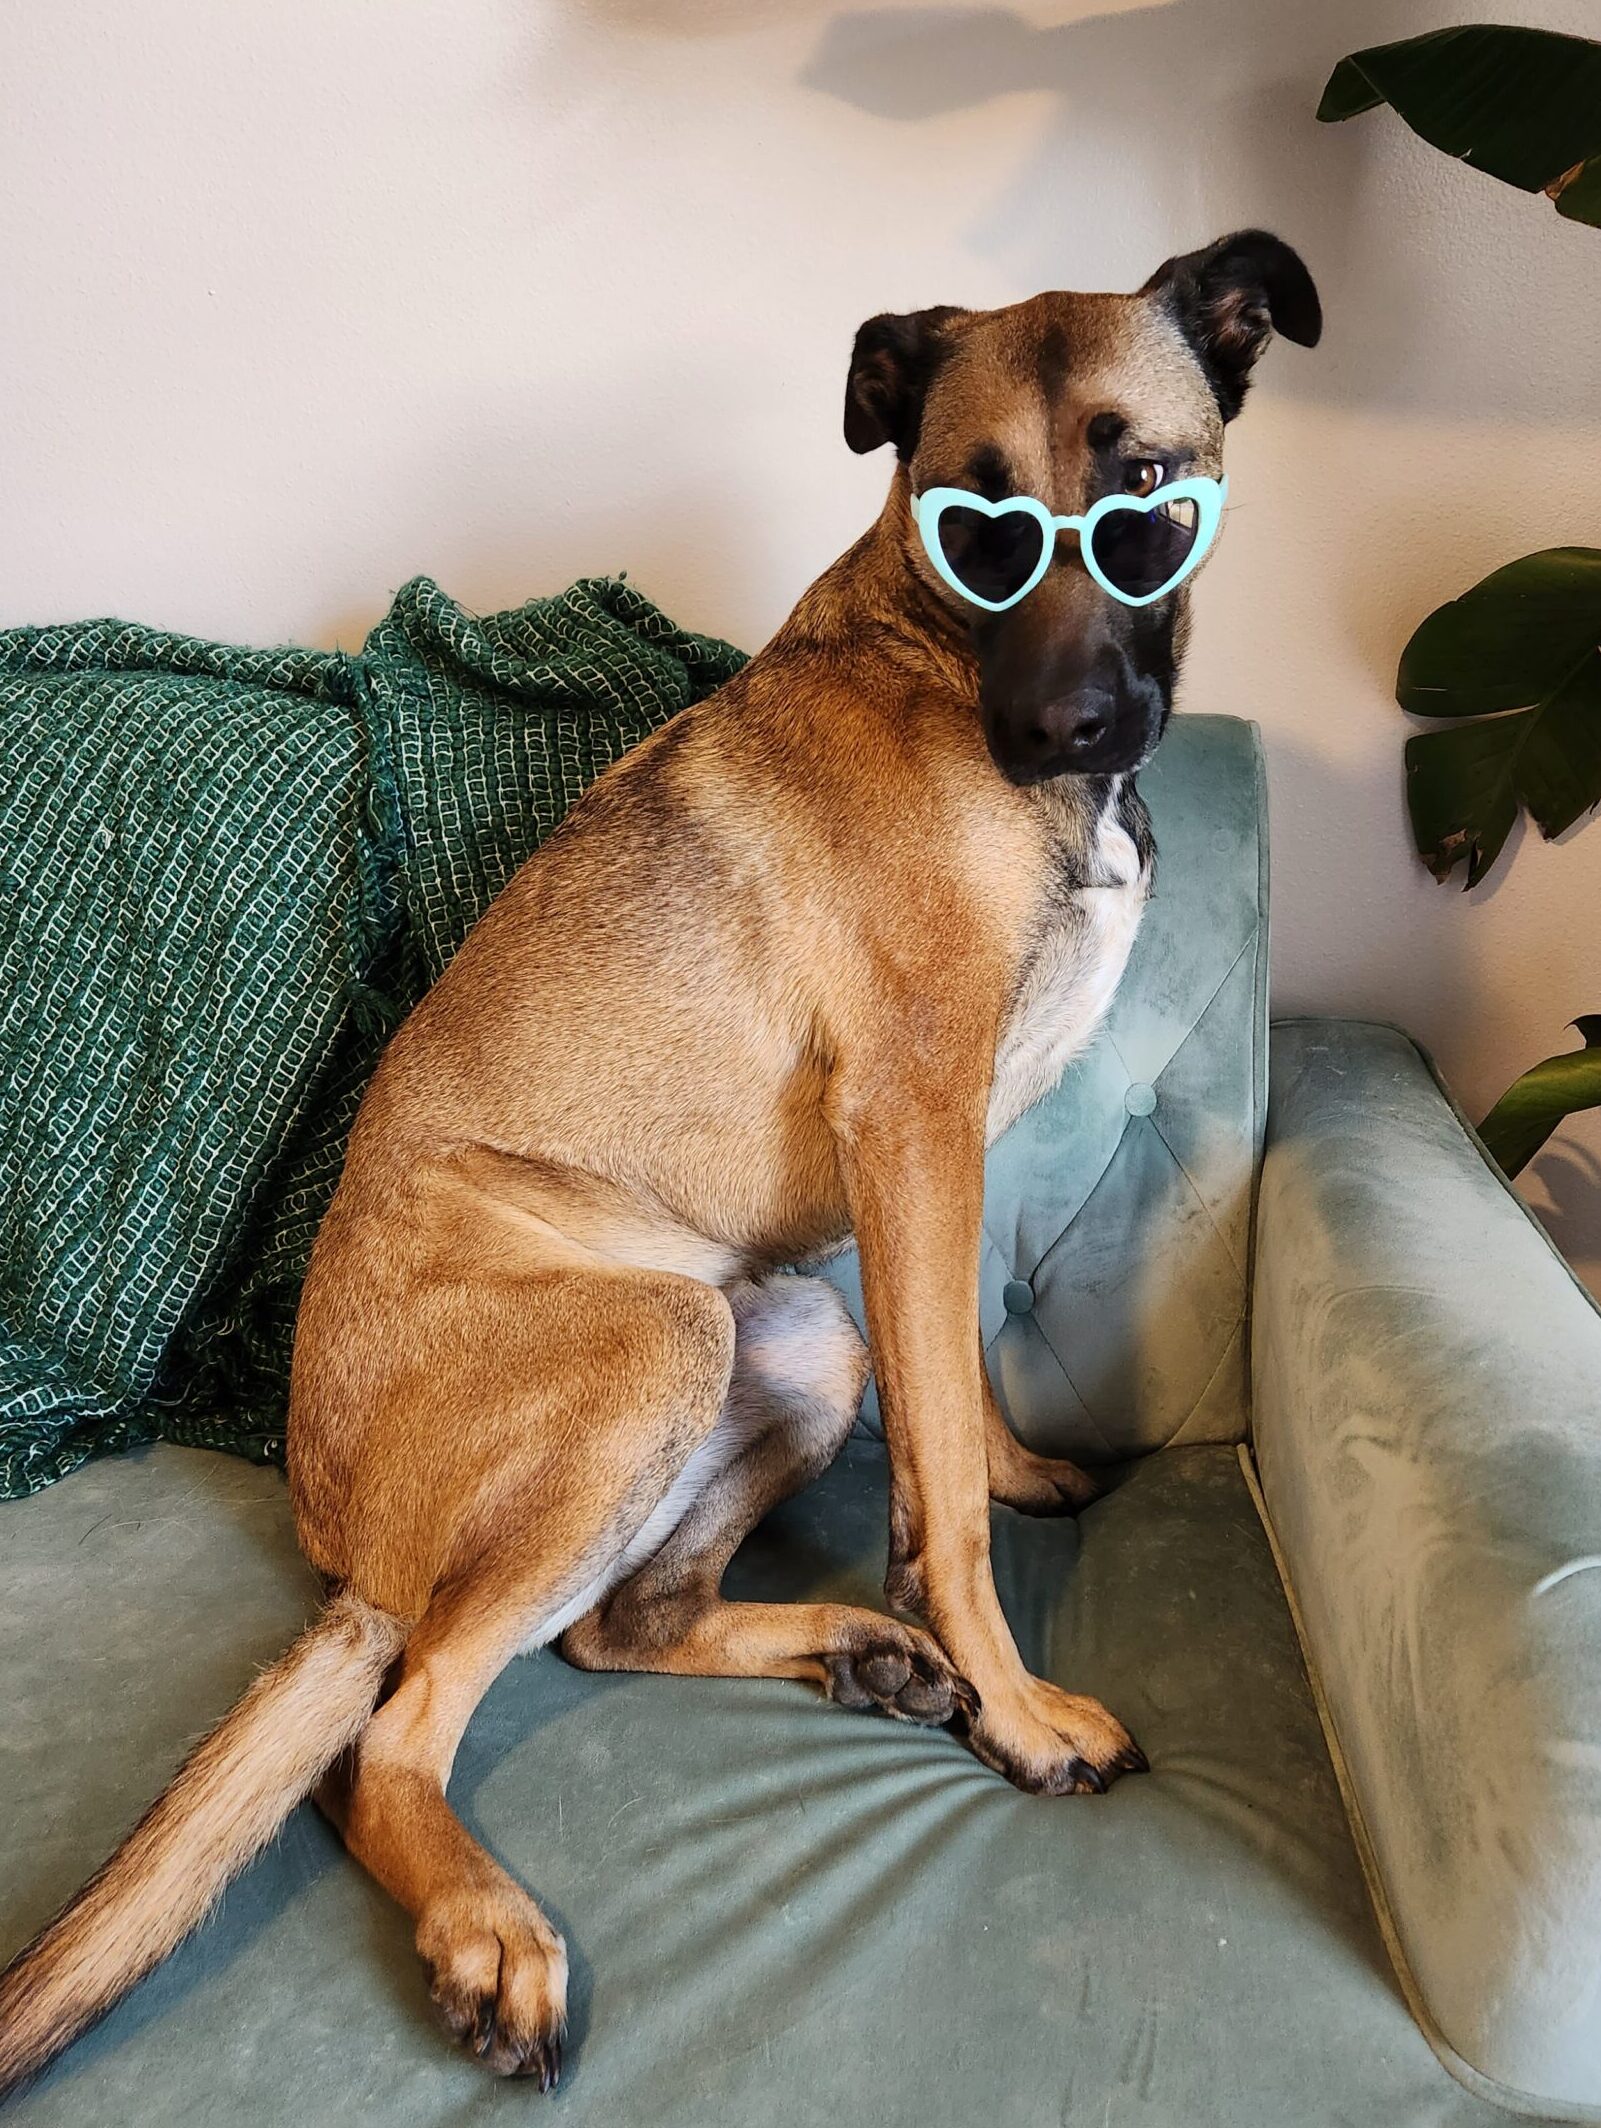 Kara, a large tan dog with black ears and muzzle, wears blue heart-shaped sunglasses on a blue velvet couch with a green blanket.